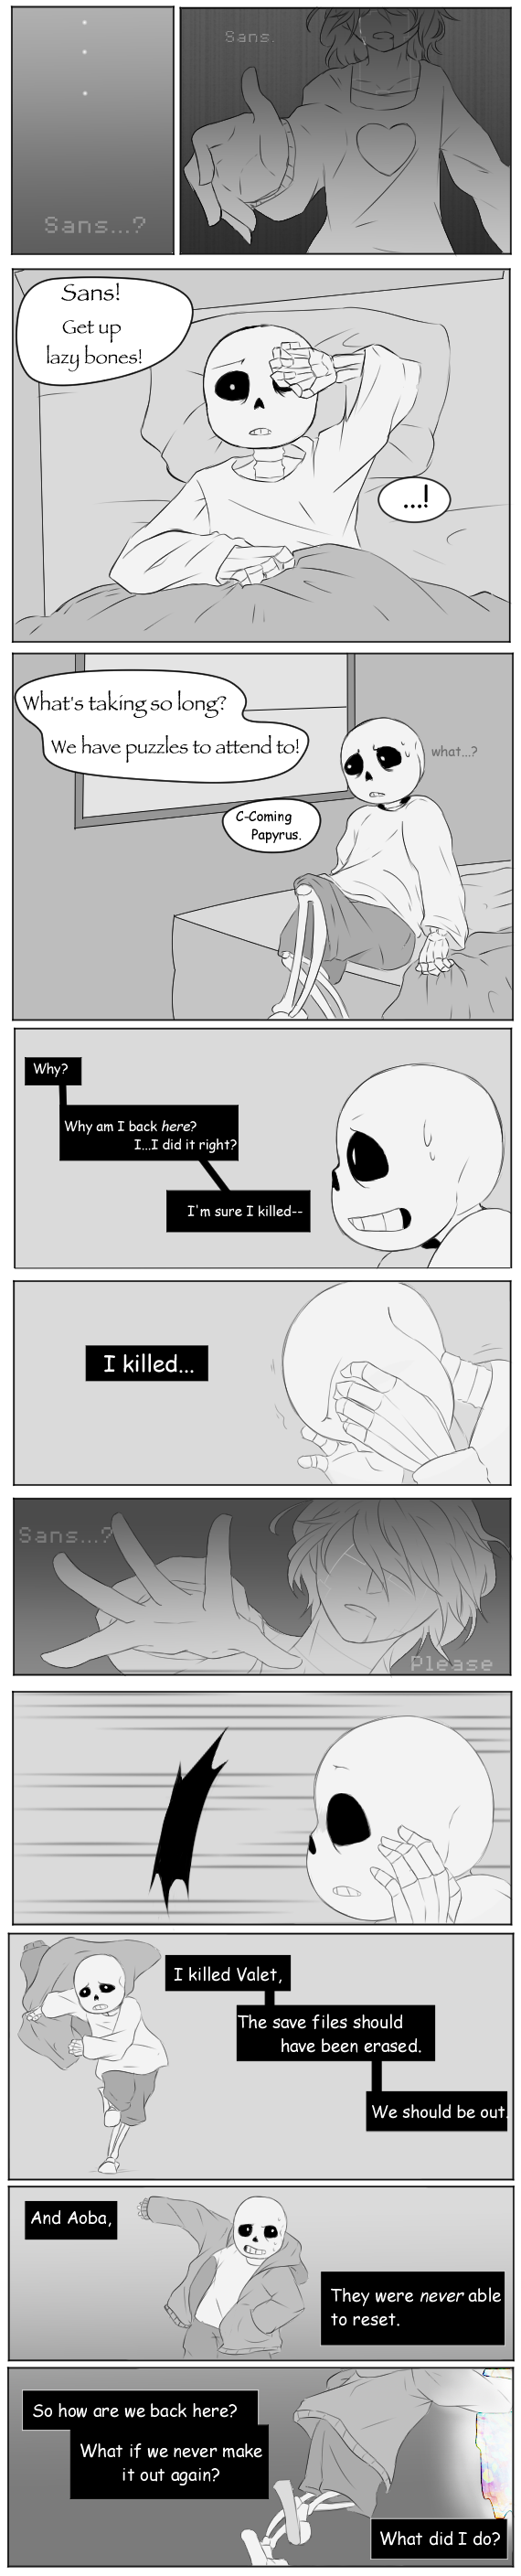 Undertale Reset: Page 1 by MaliceAndMacarons on DeviantArt